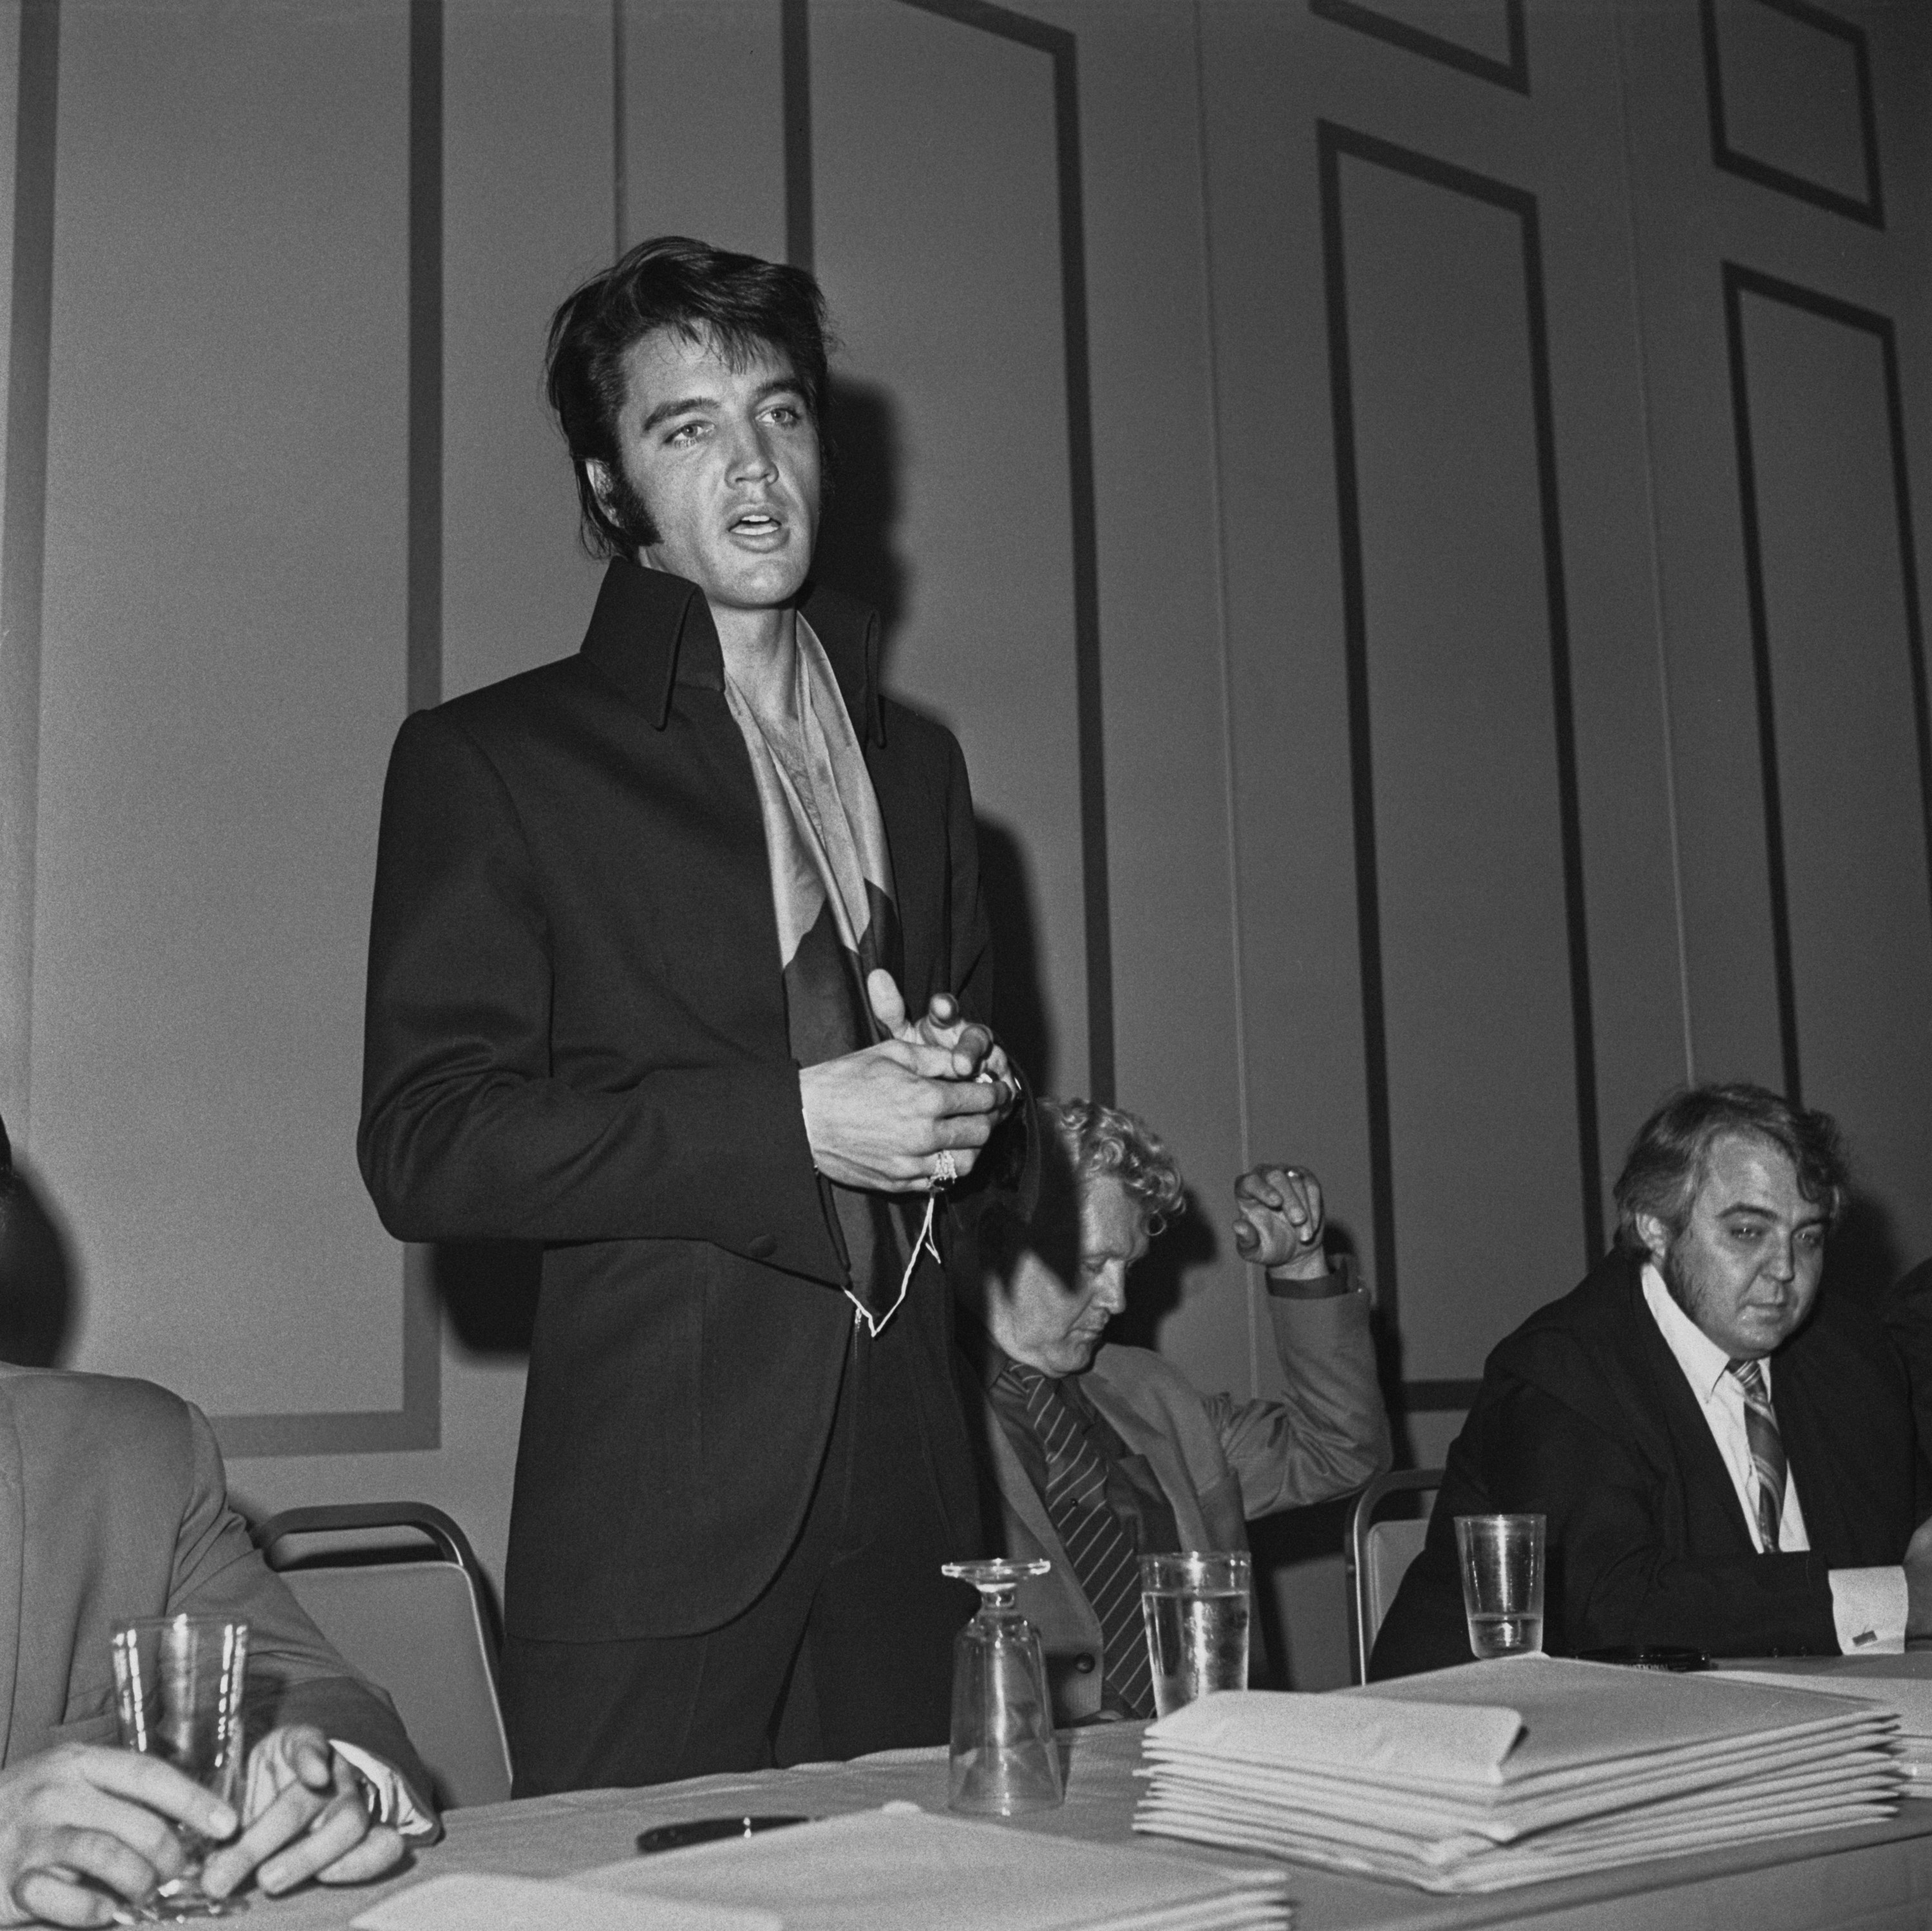 Elvis Presley wearing a jacket with a scarf in the &#x27;convention hall&#x27; of the International Hotel in Las Vegas, Nevada, 1st August 1969